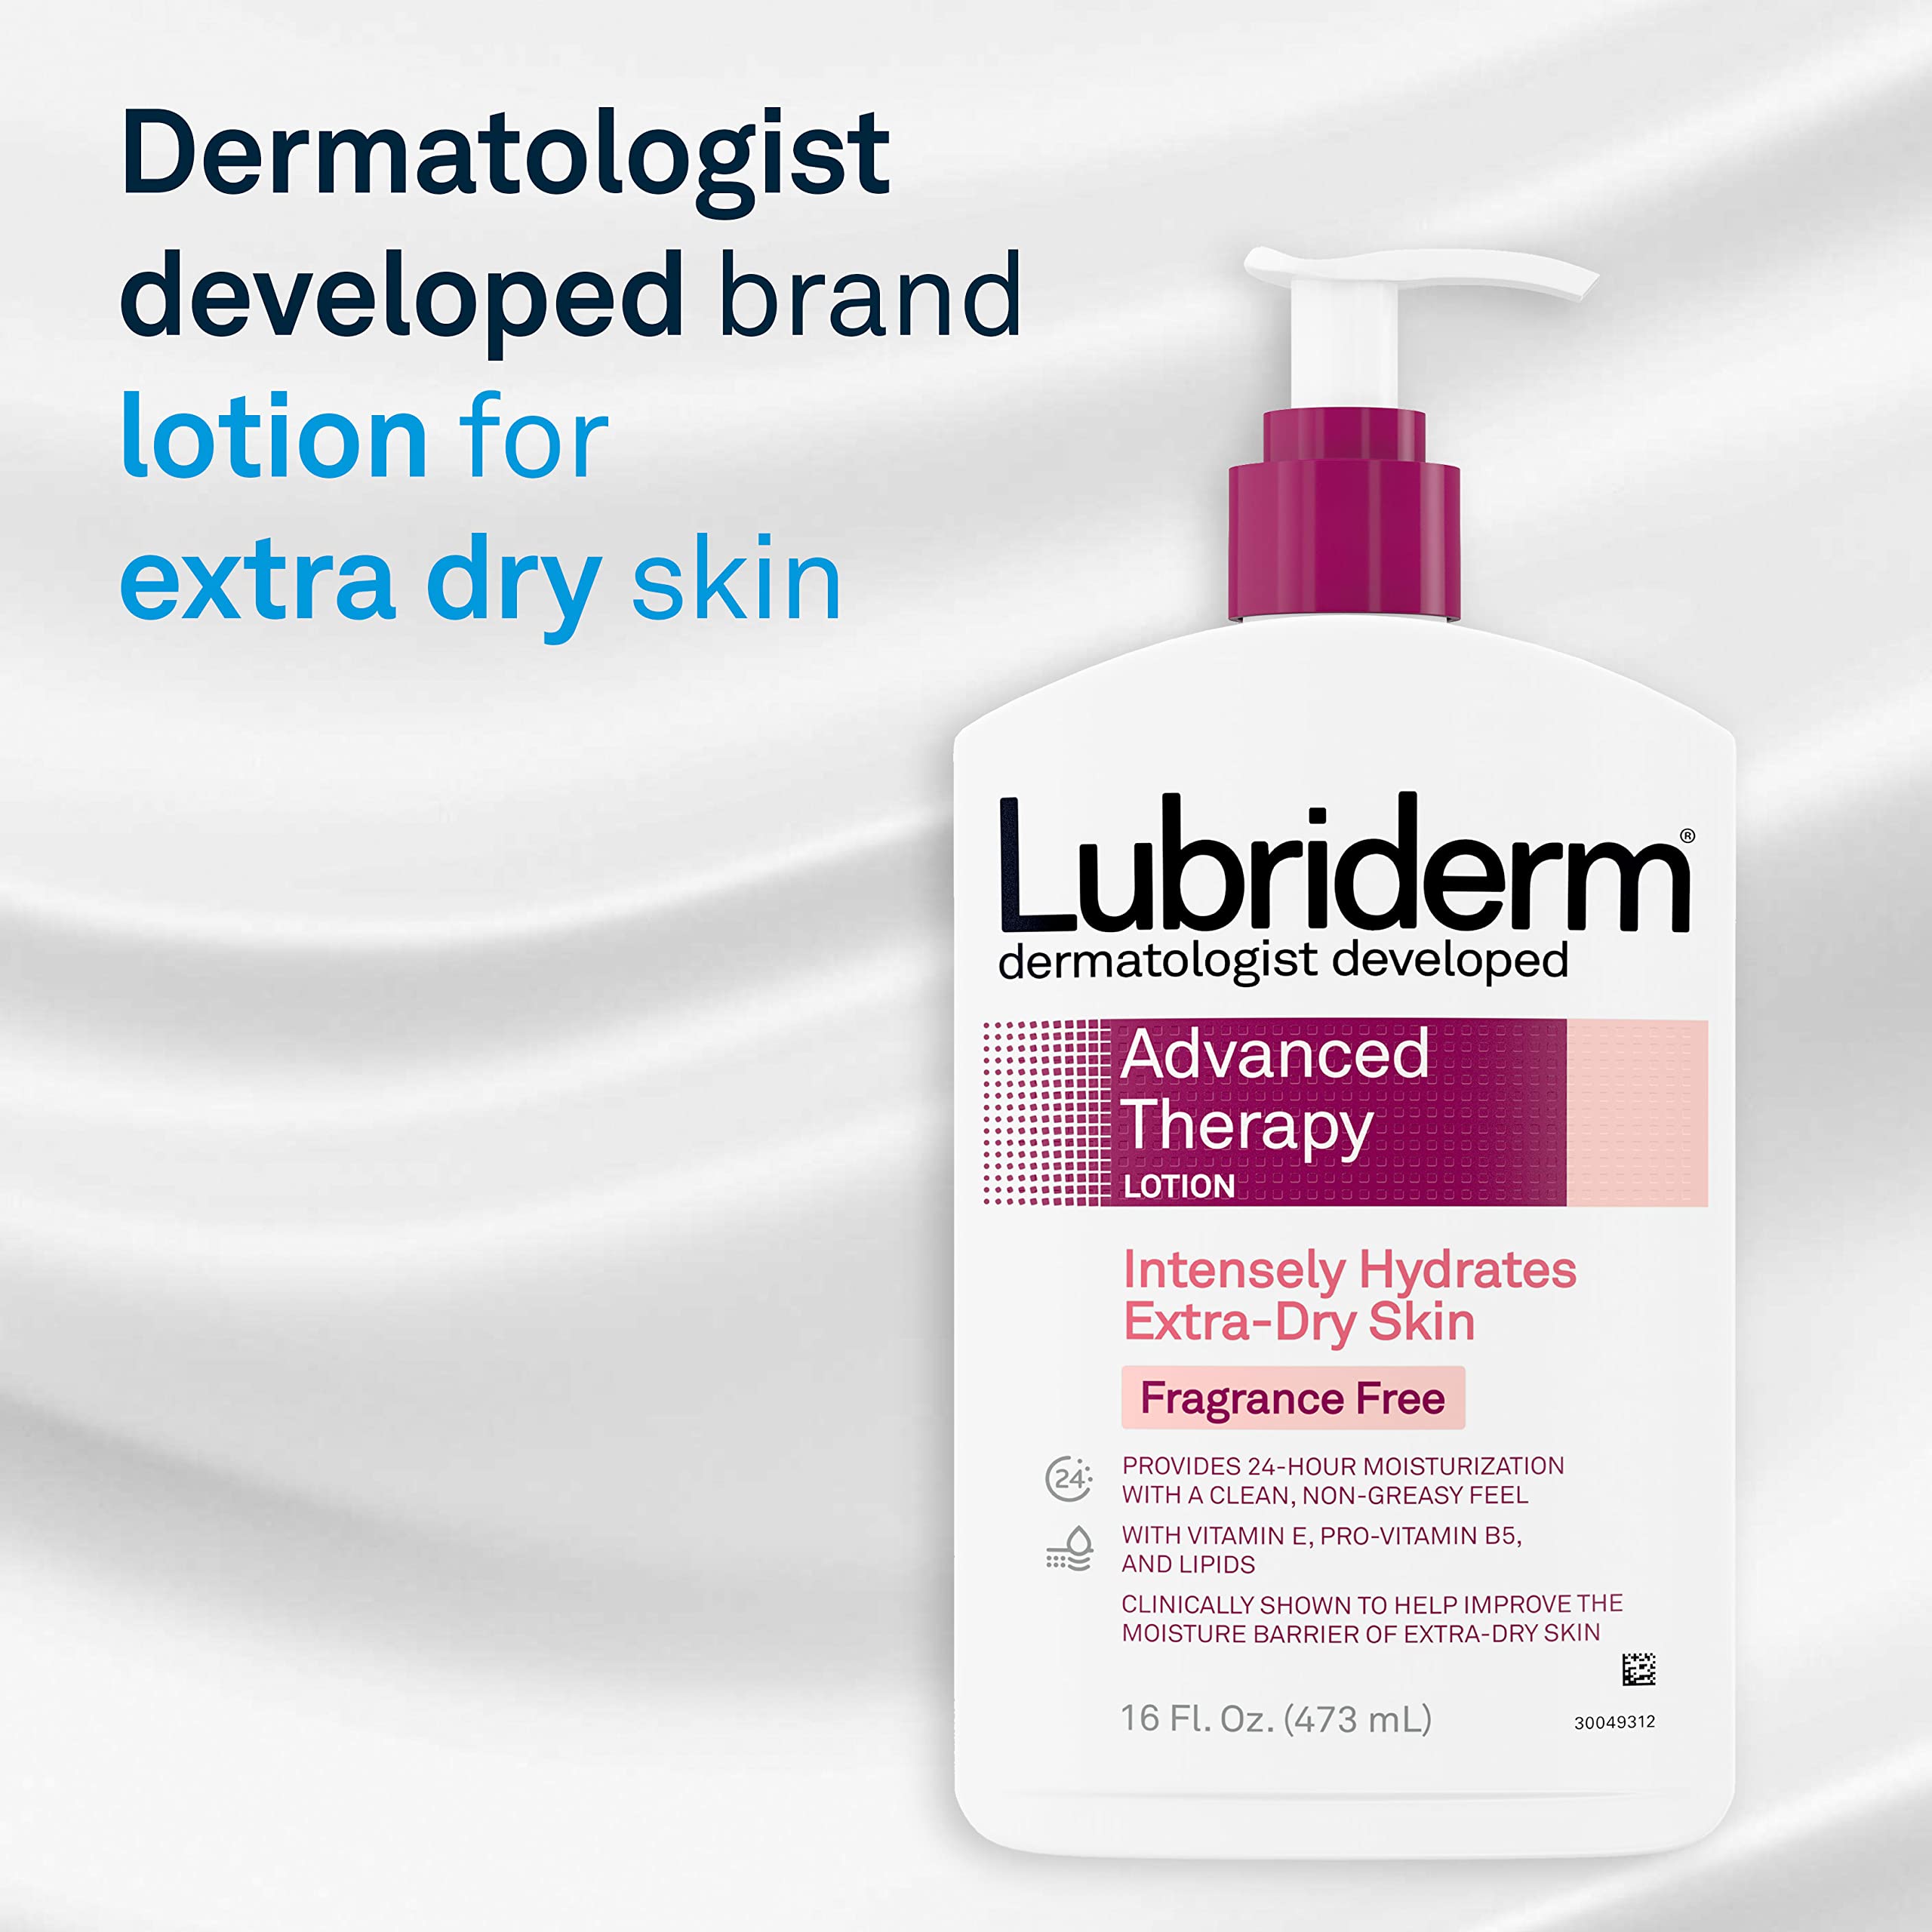 Lubriderm Advanced Therapy Fragrance Free Moisturizing Hand & Body Lotion + Pro-Ceramide with Vitamins E & Pro-Vitamin B5, Intense Hydration for Itchy, Extra Dry Skin, Non-Greasy, 32 fl. oz